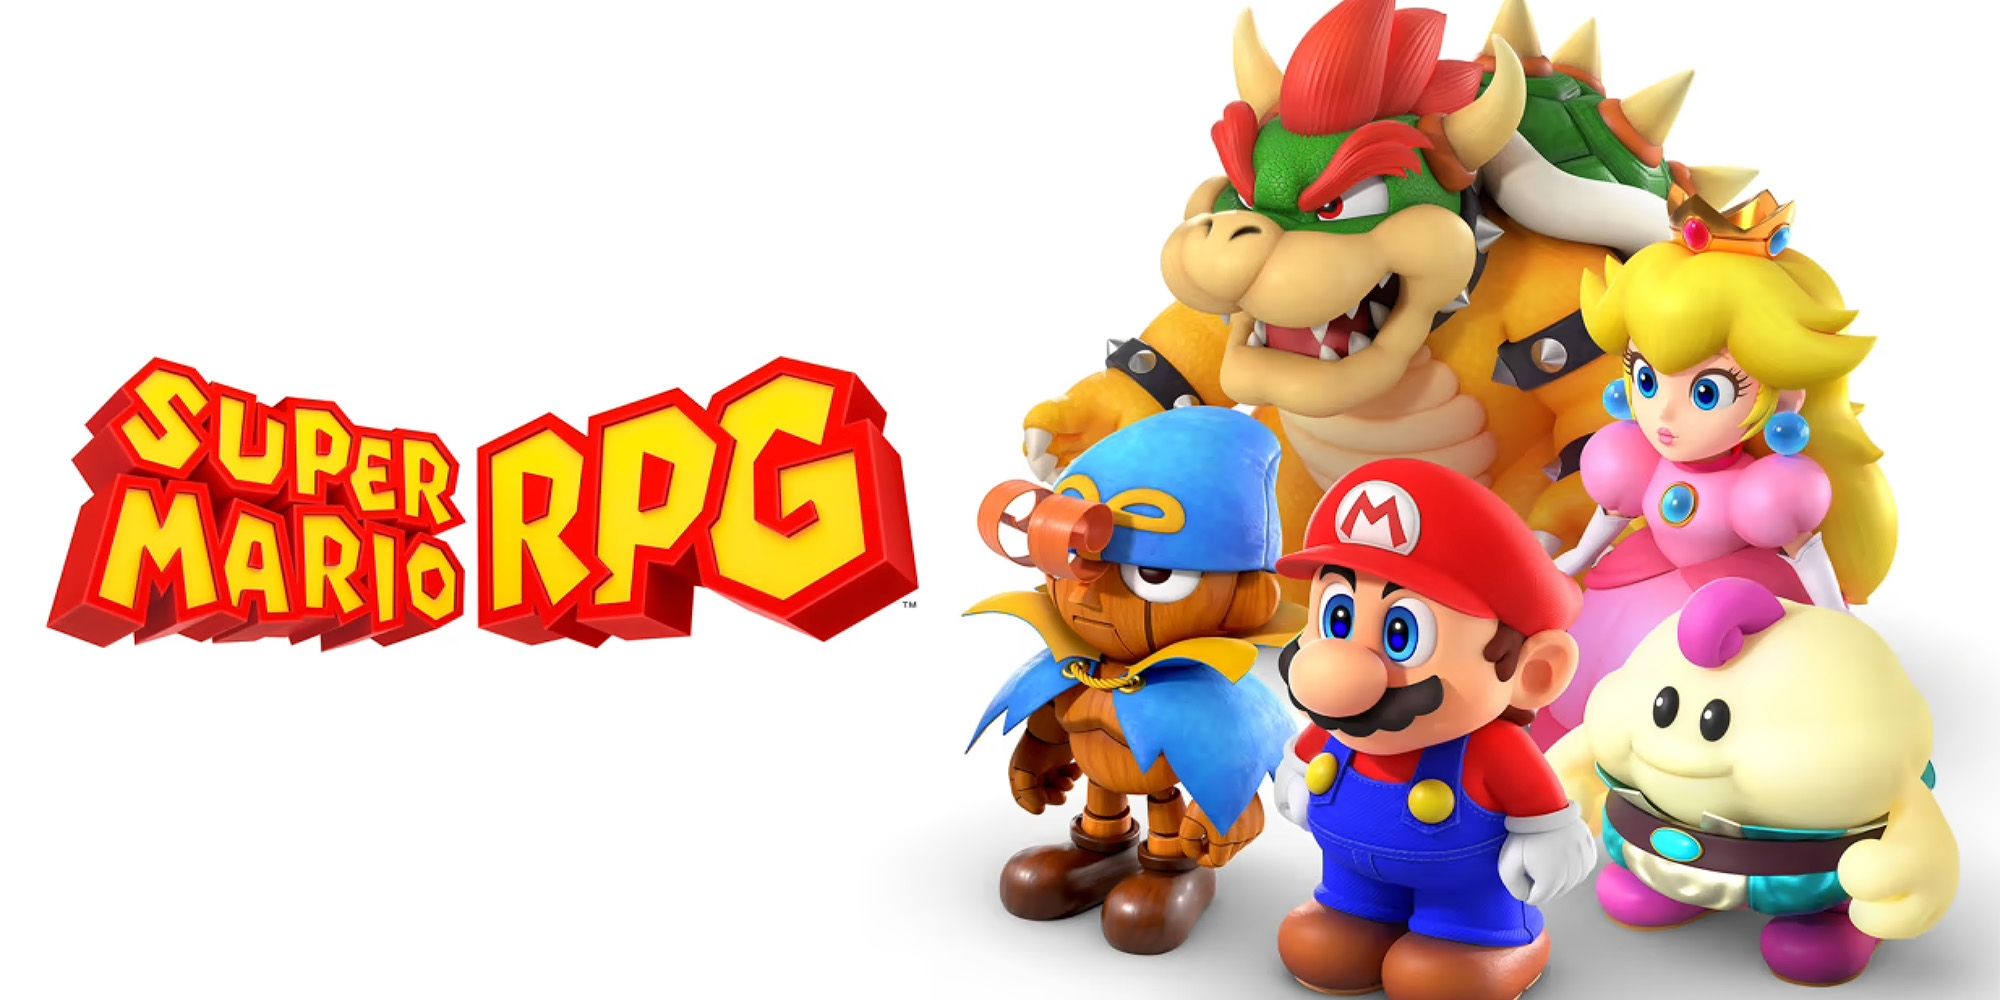 Super Mario RPG - Mario, Mallow, Geno, Peach, and Bowser standing next to the logo